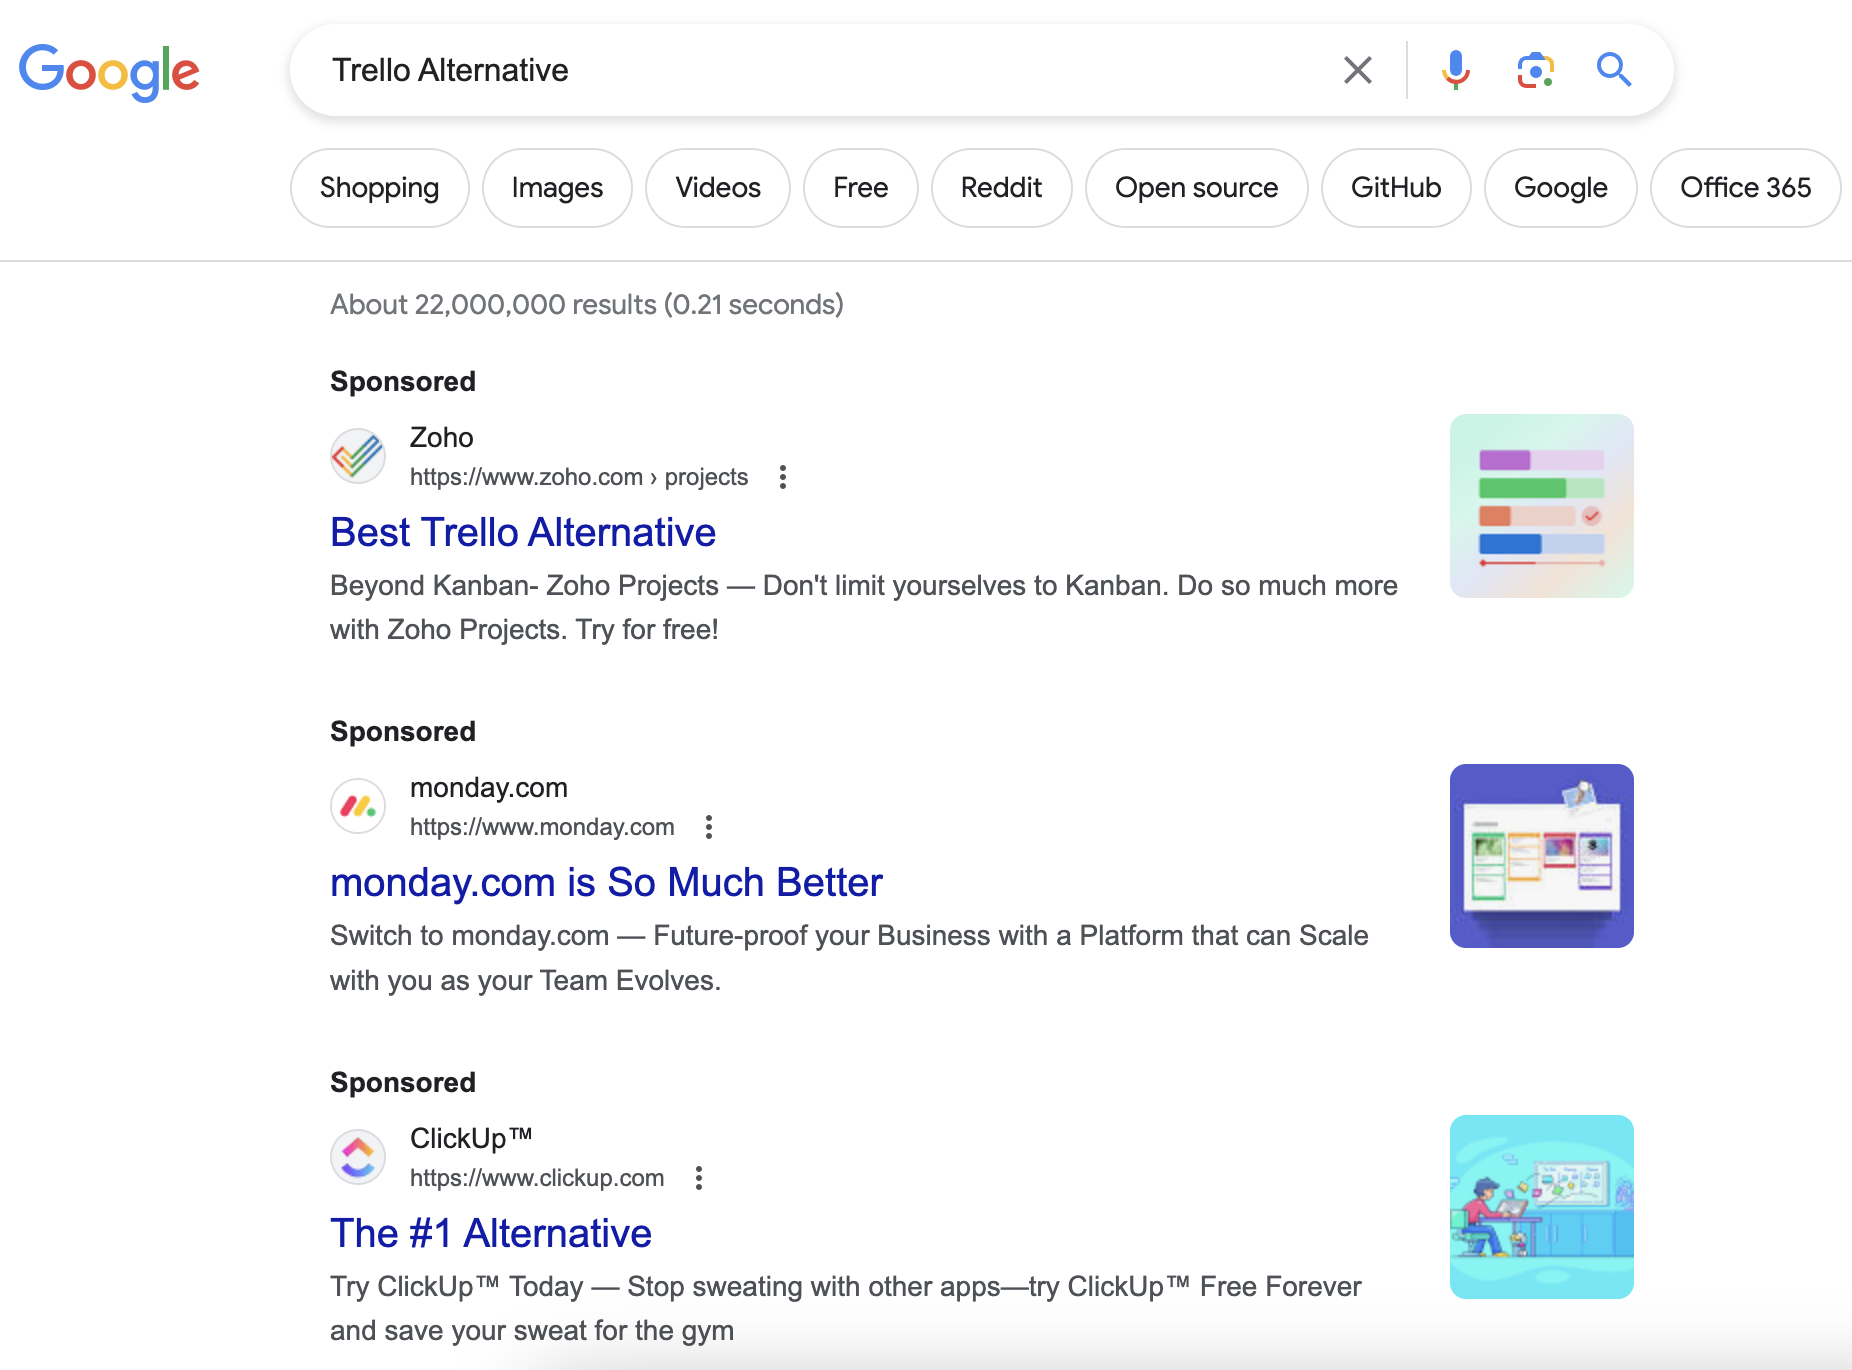 The SERP for Trello Alternative begins with three paid ads from competitors